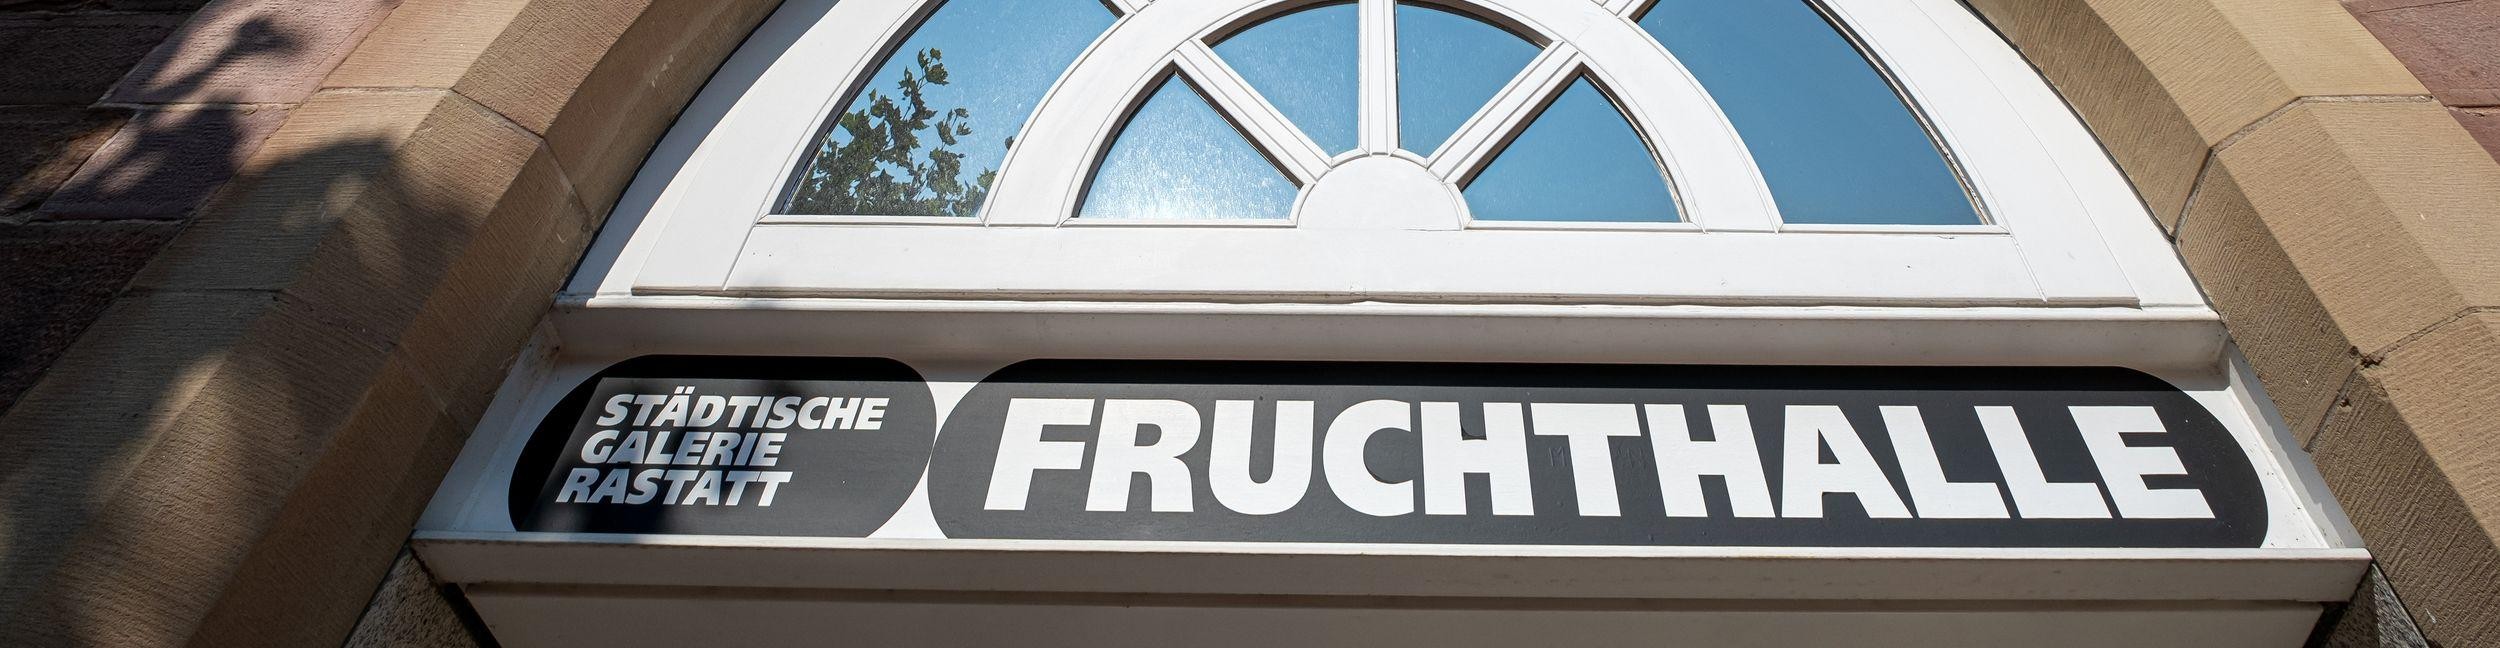 "Fruchthalle" lettering above the entrance to the Fruchthalle municipal gallery